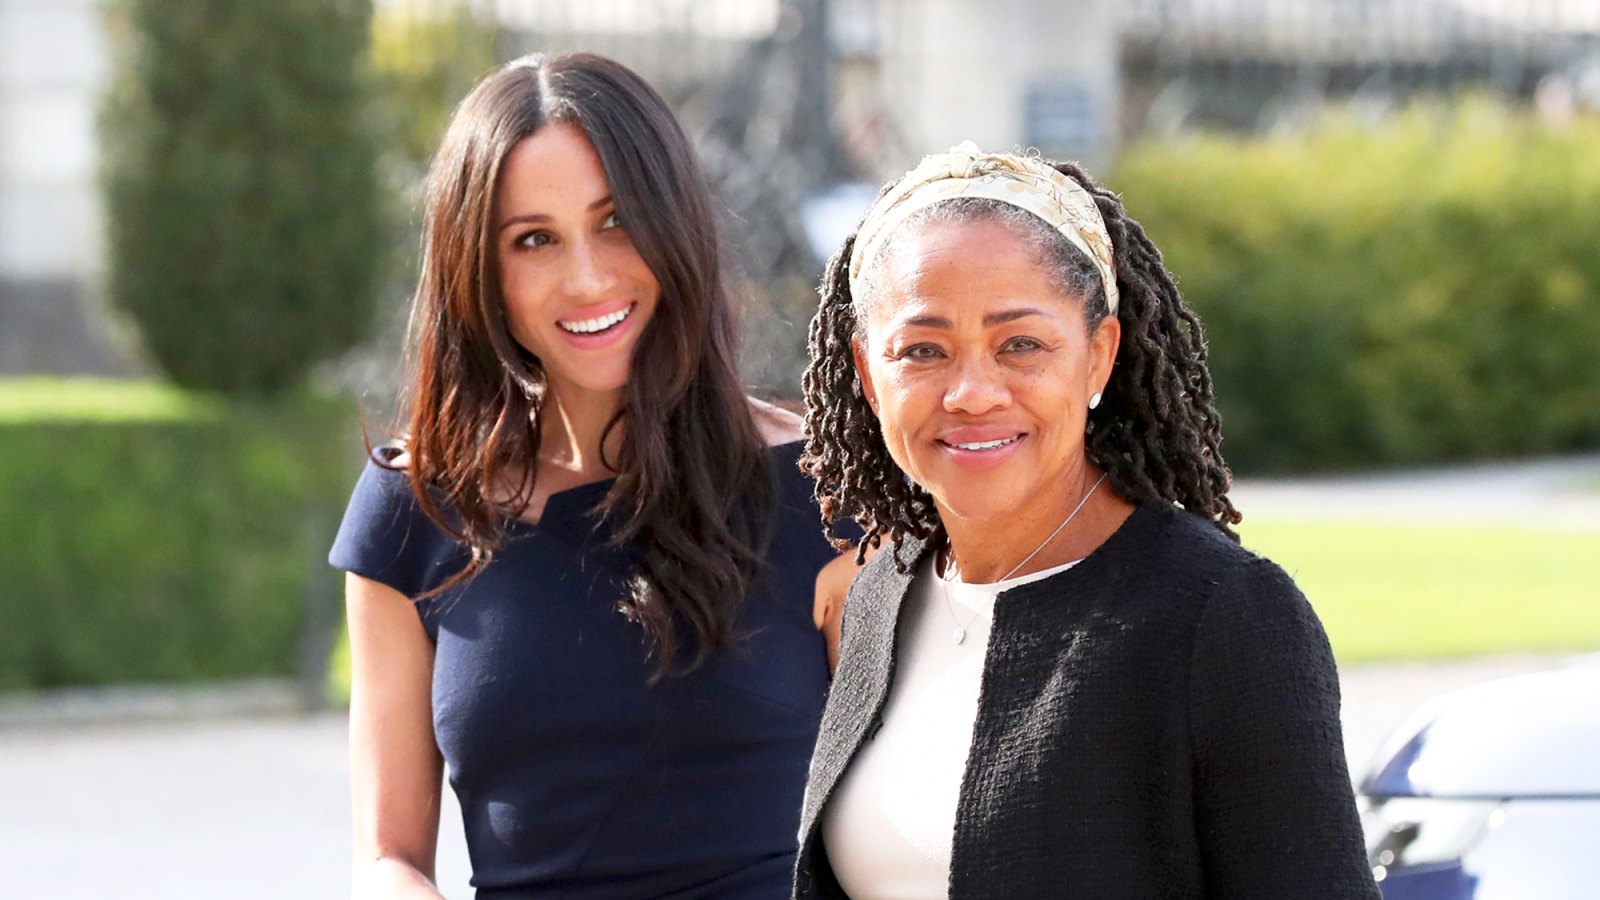 Meghan Markle and her mother Doria Ragland arrive at Cliveden House Hotel on the National Trust's Cliveden Estate on May 18, 2018 in Berkshire, England.